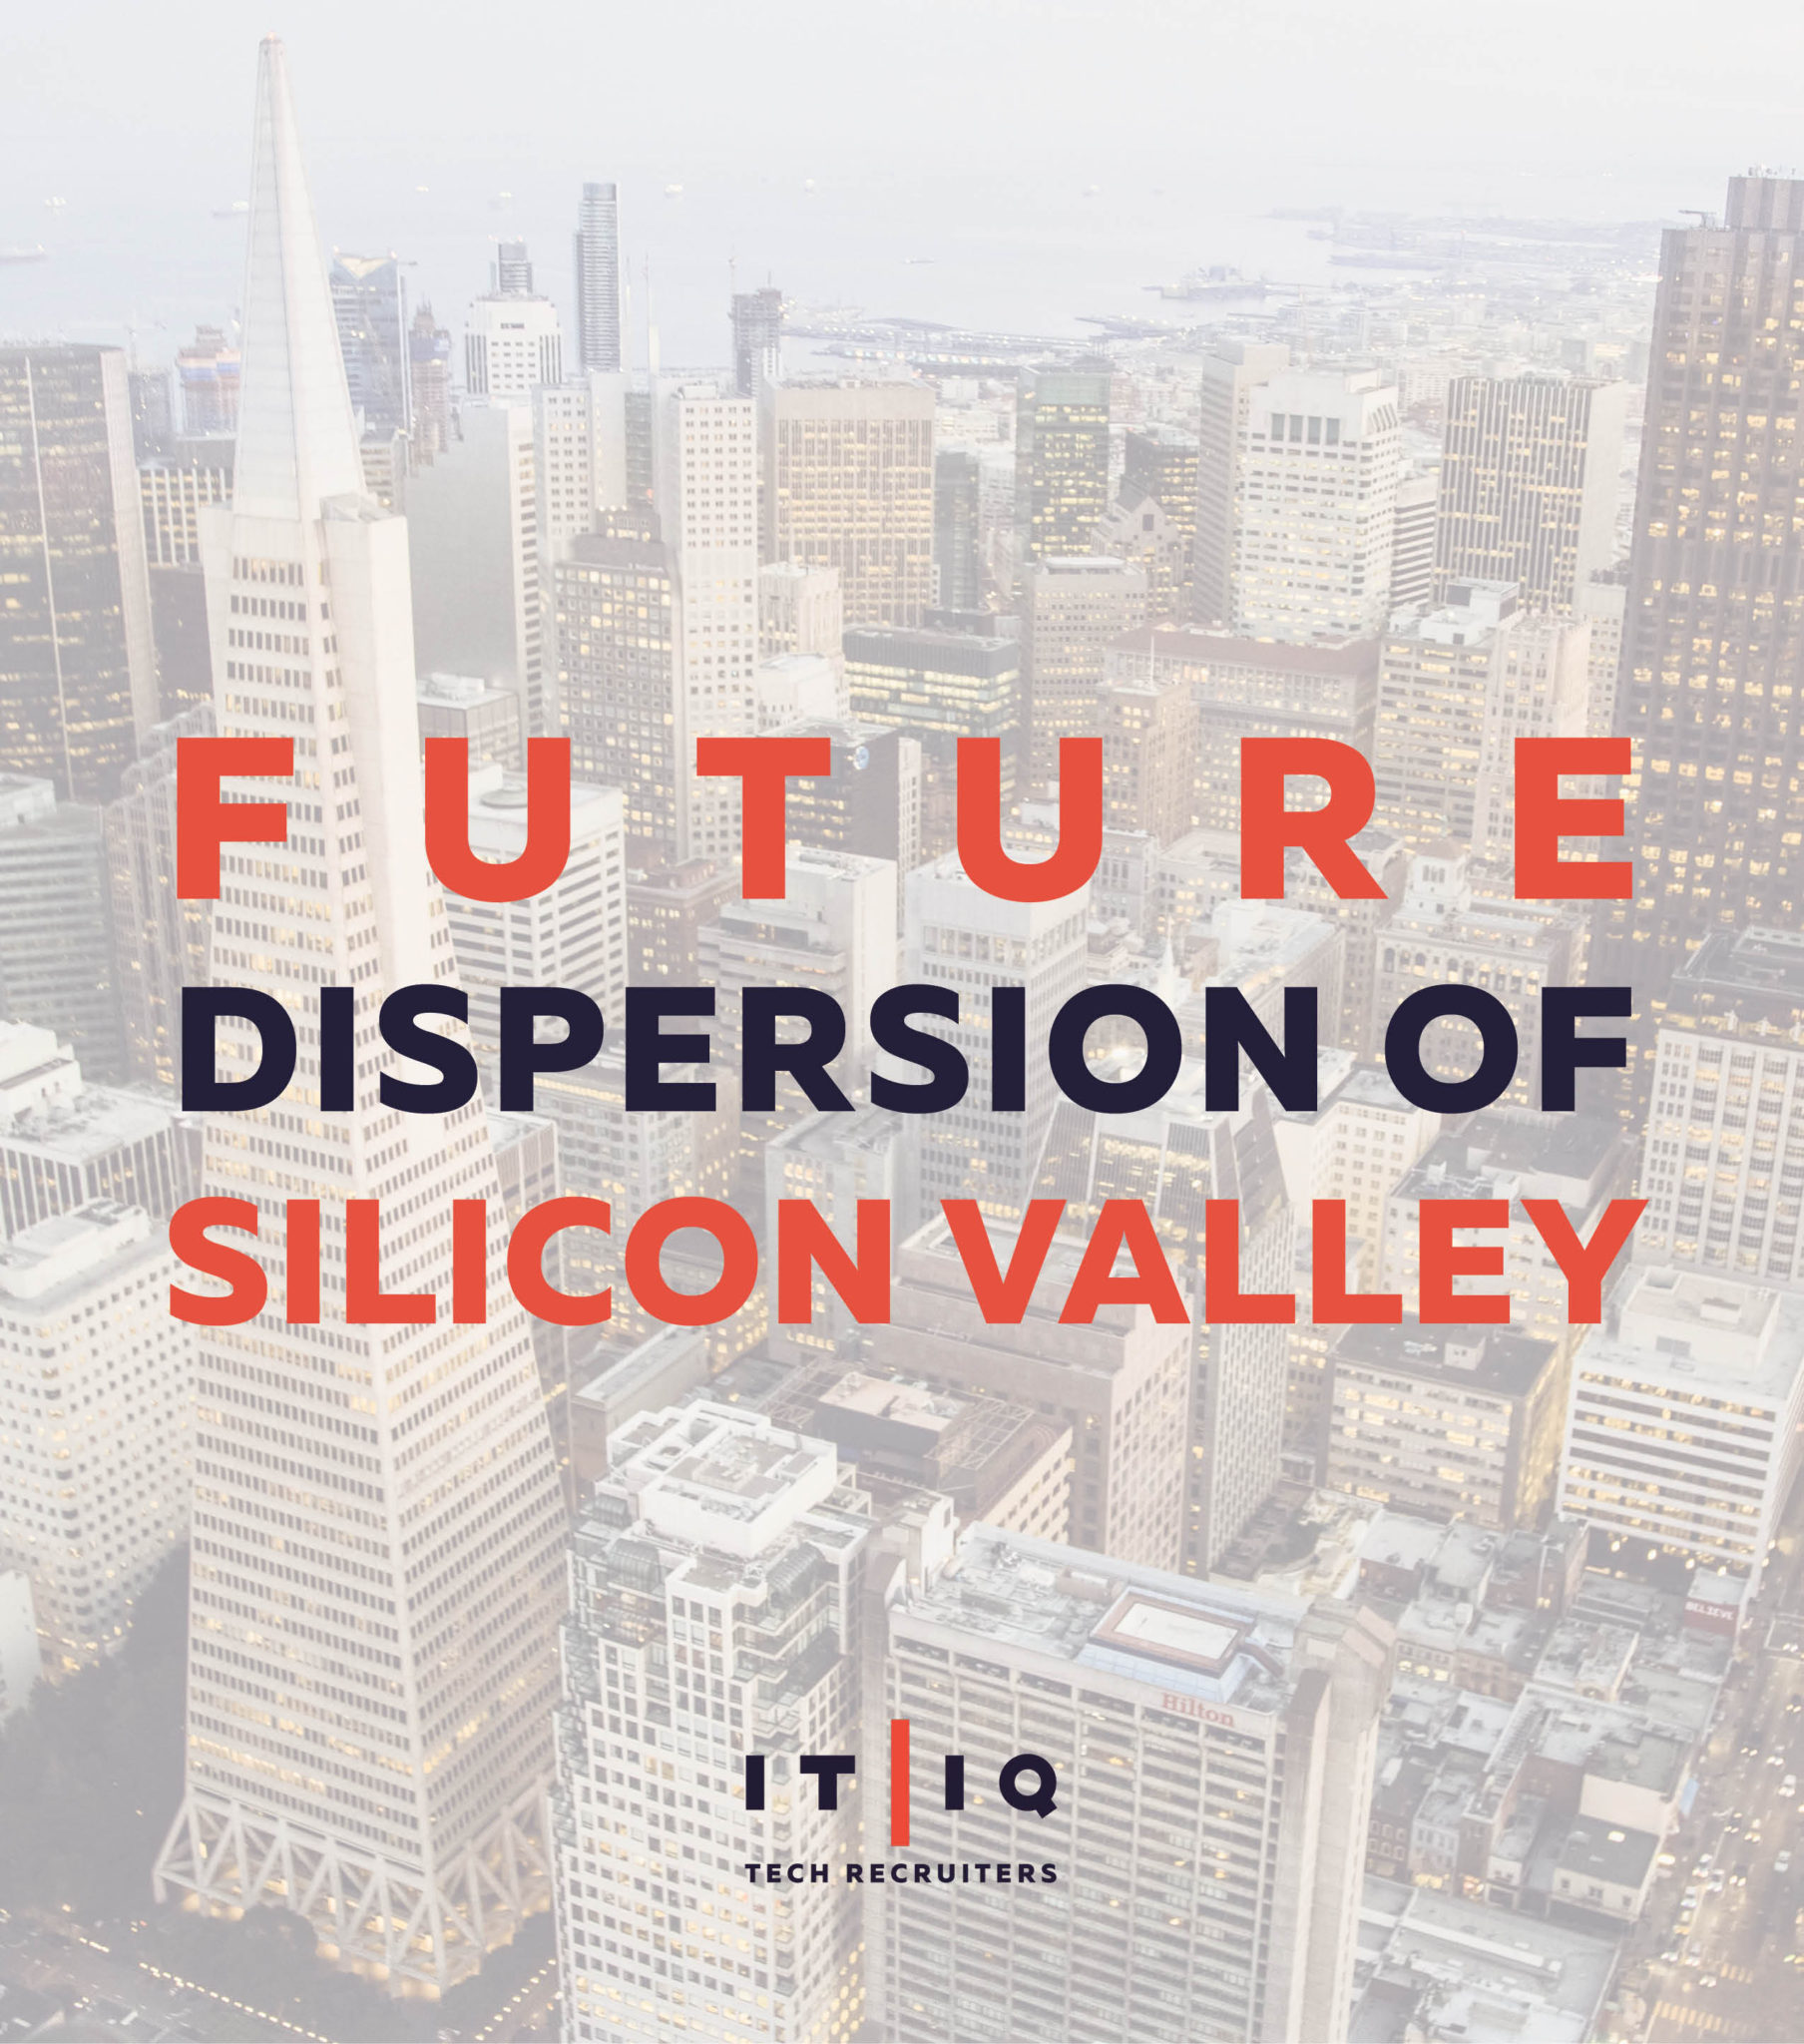 IT/IQ Recruiters Future Dispersion of Silicon Valley graphic, background image of Vancouver